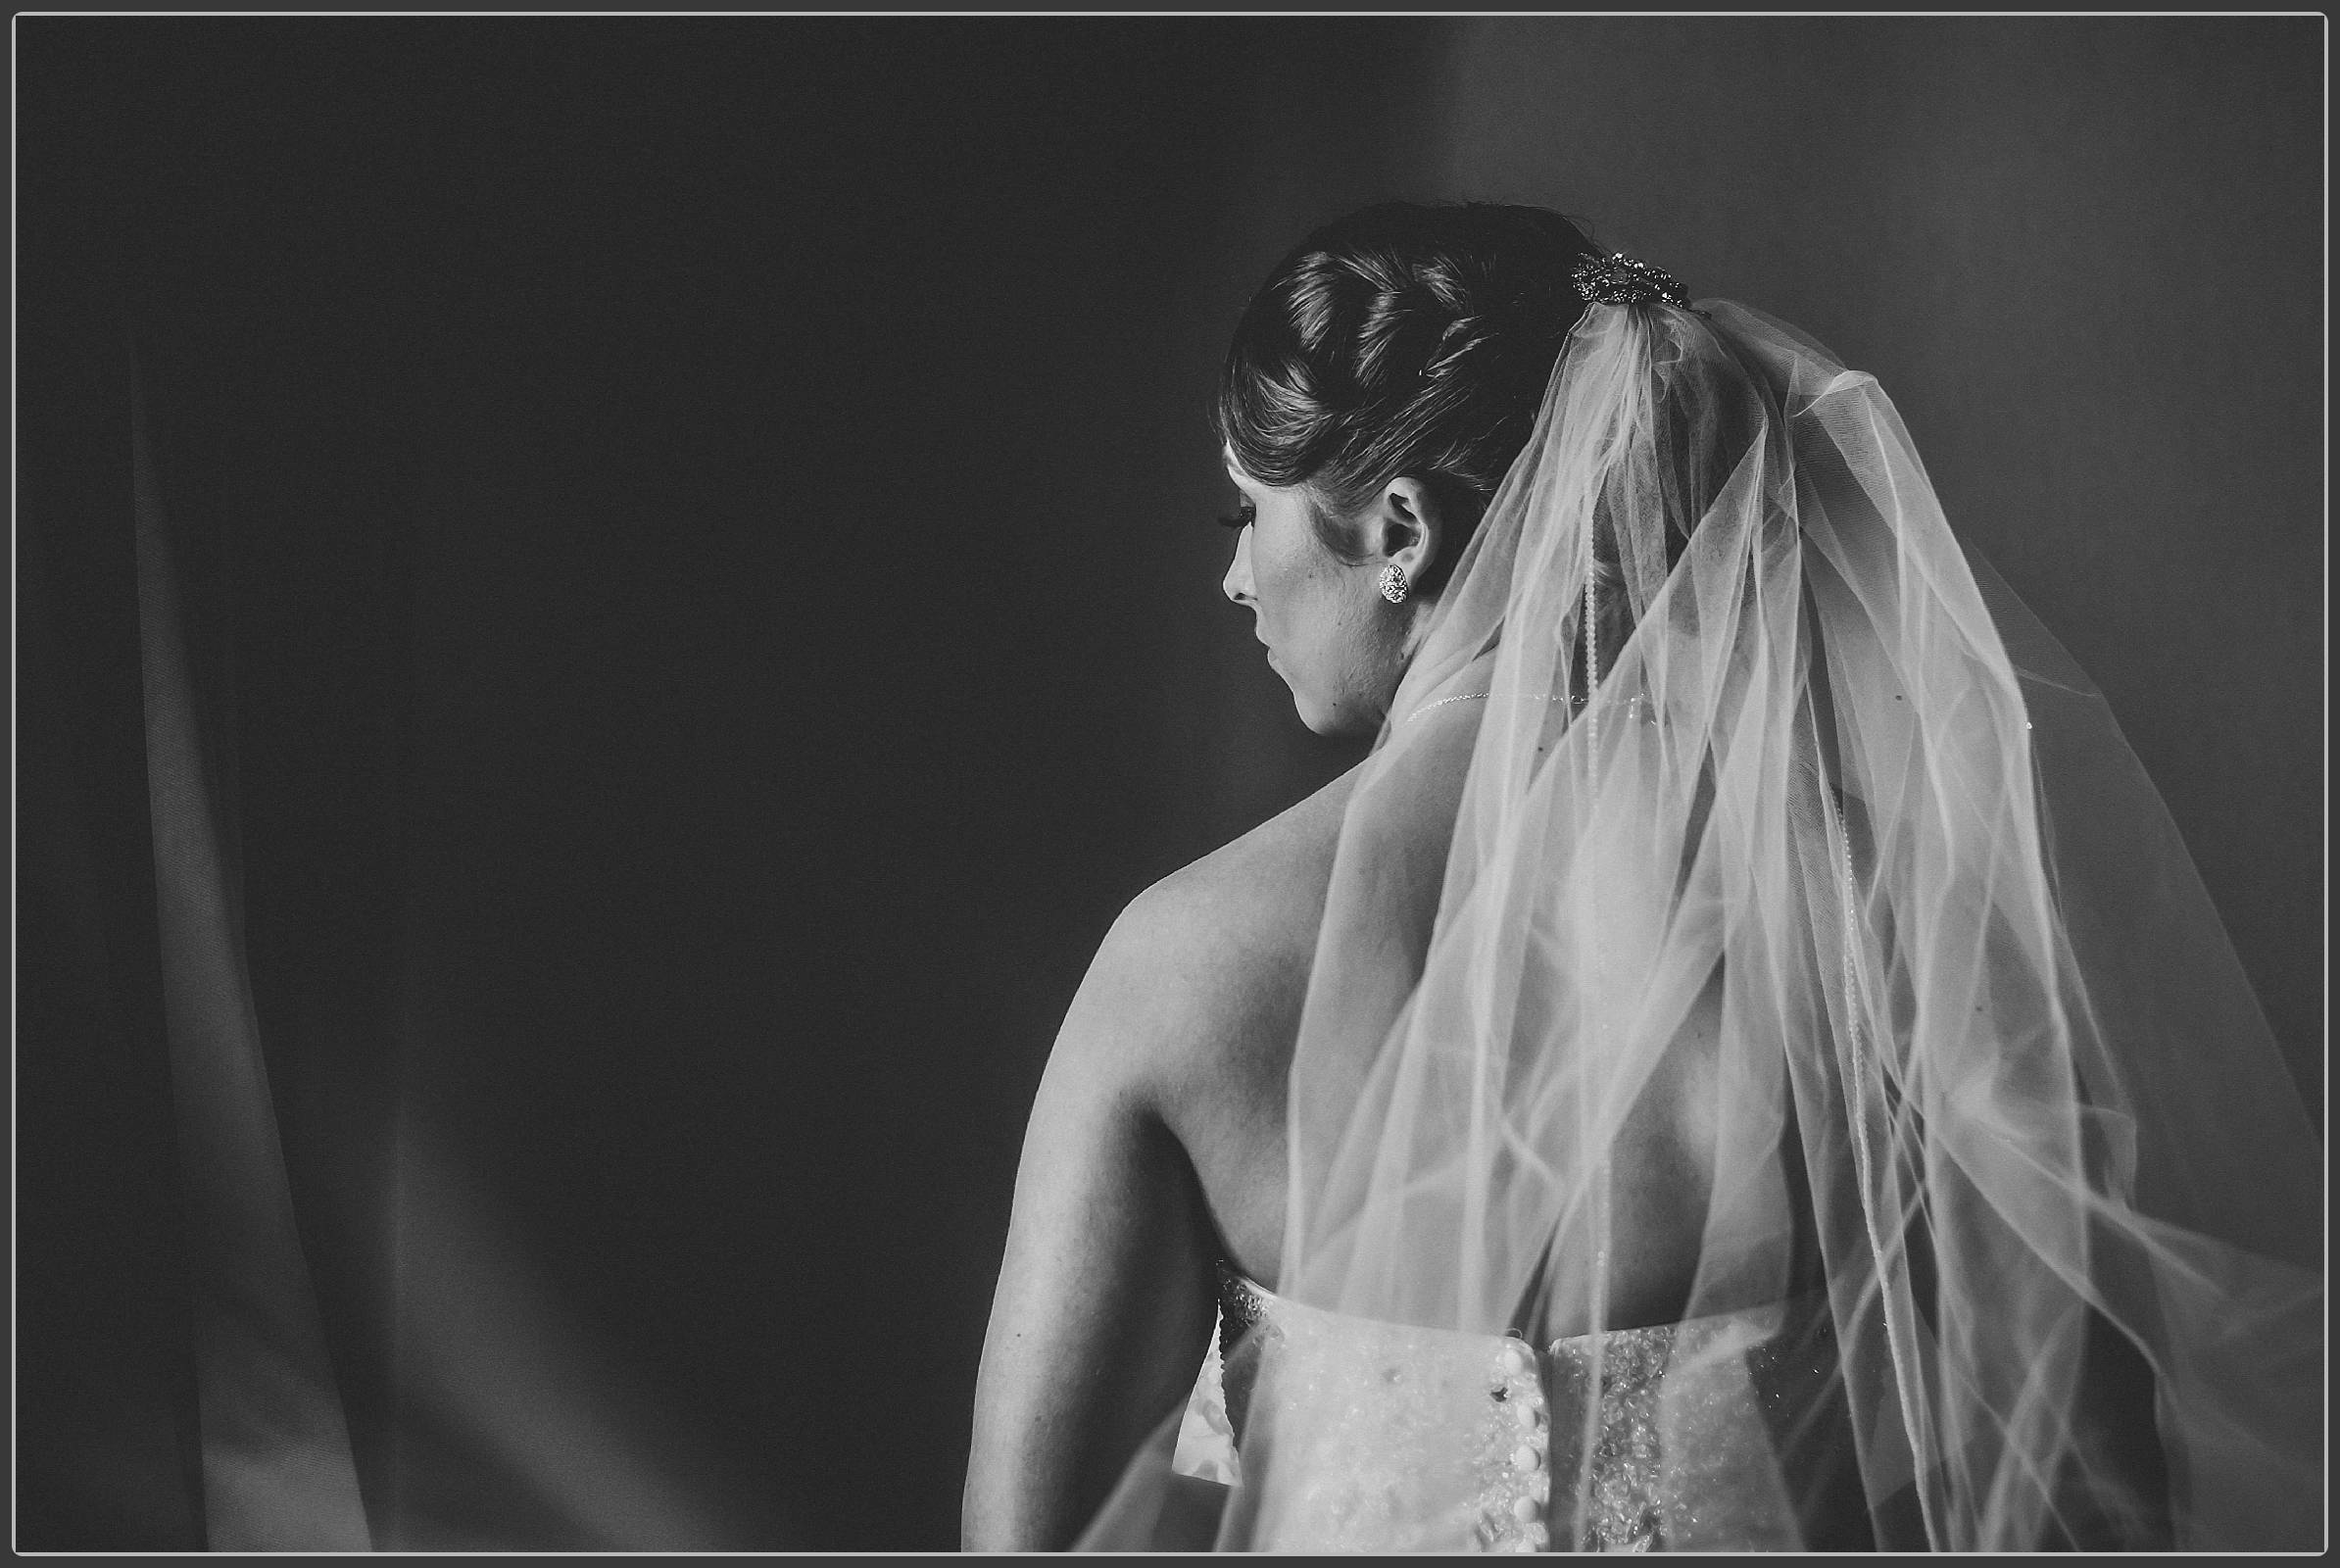 The gorgeous bride in black and white 2